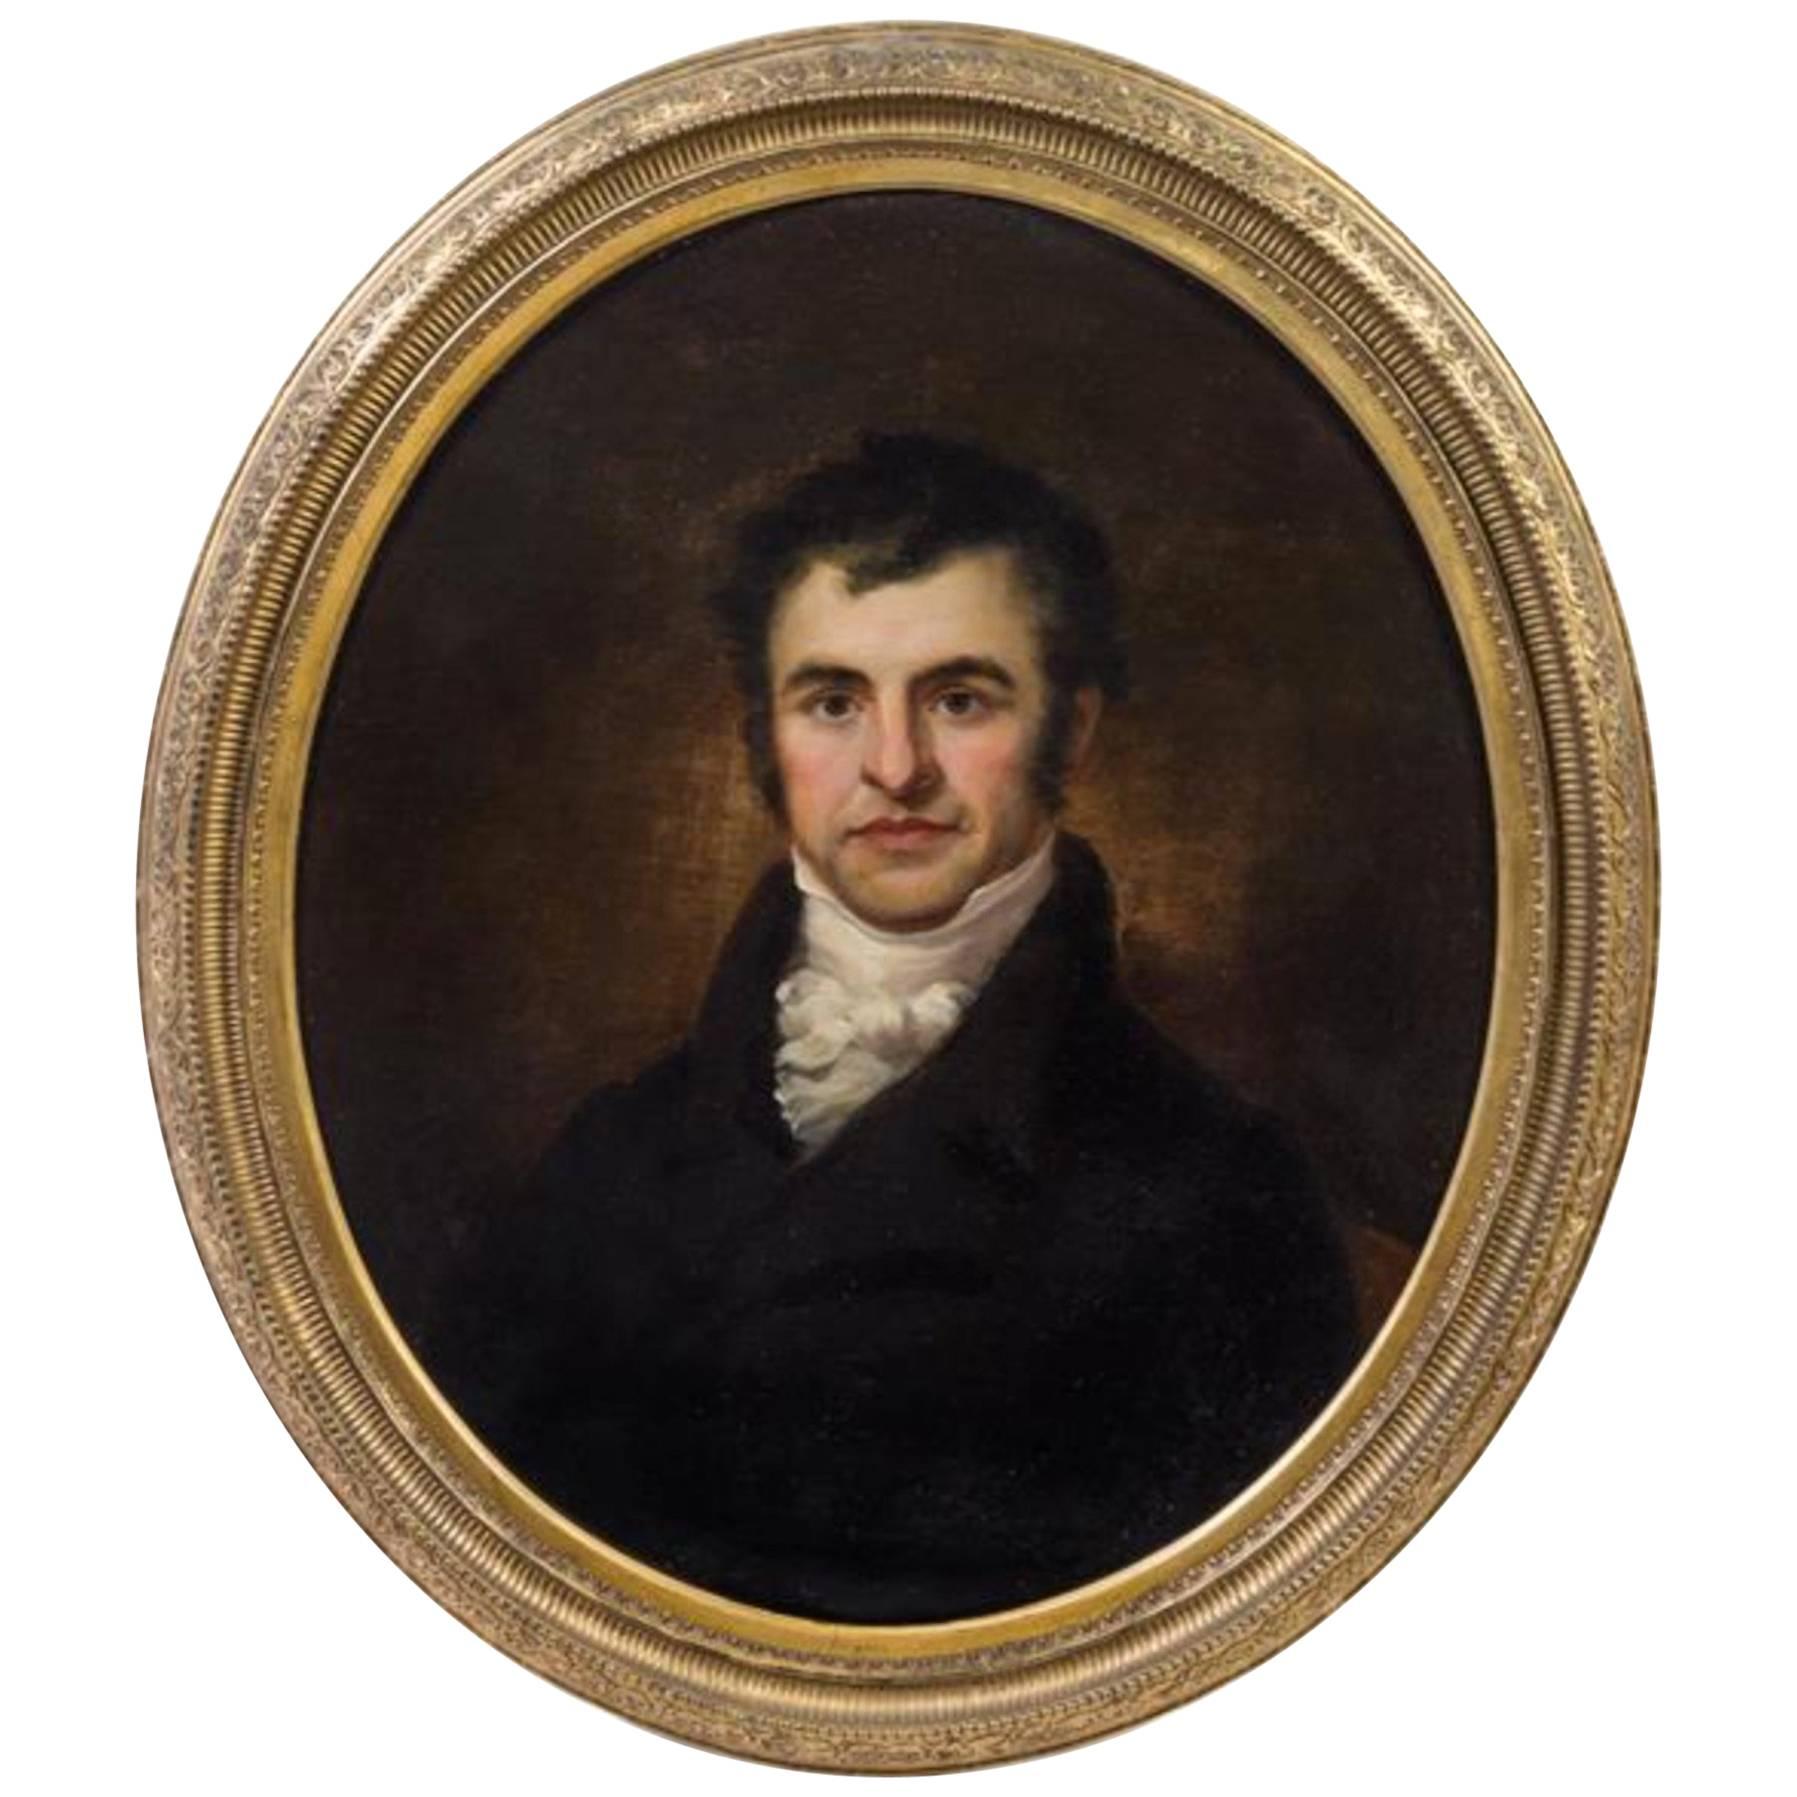  Artist Unknown Early 19th Century Portrait of Robert Burns Oil on Canvas